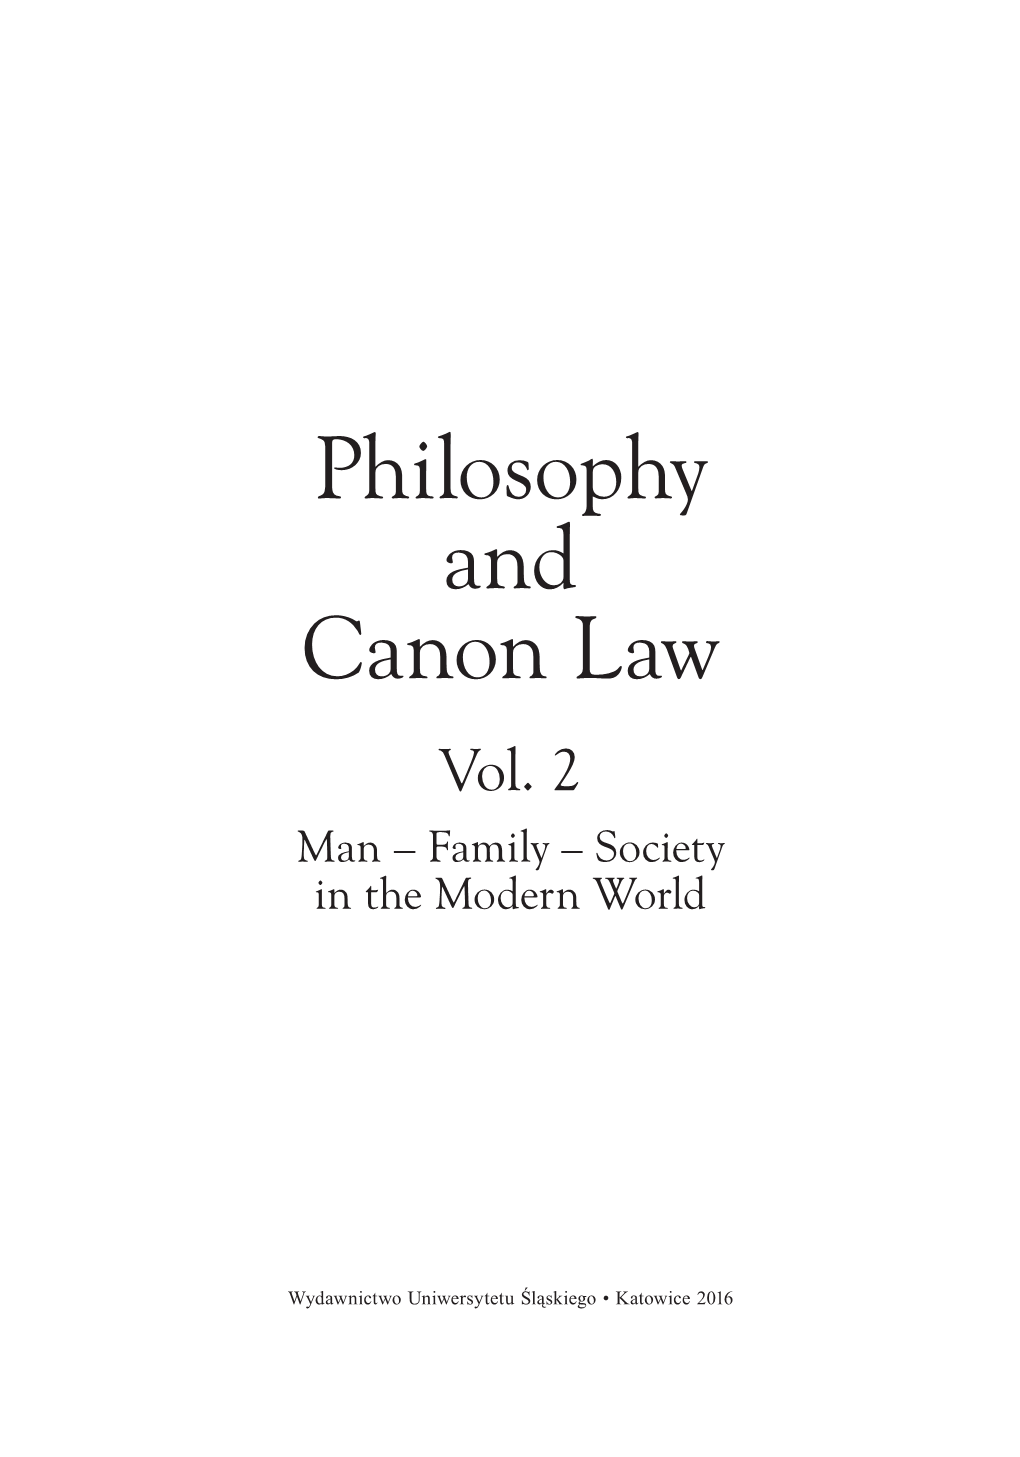 Philosophy and Canon Law